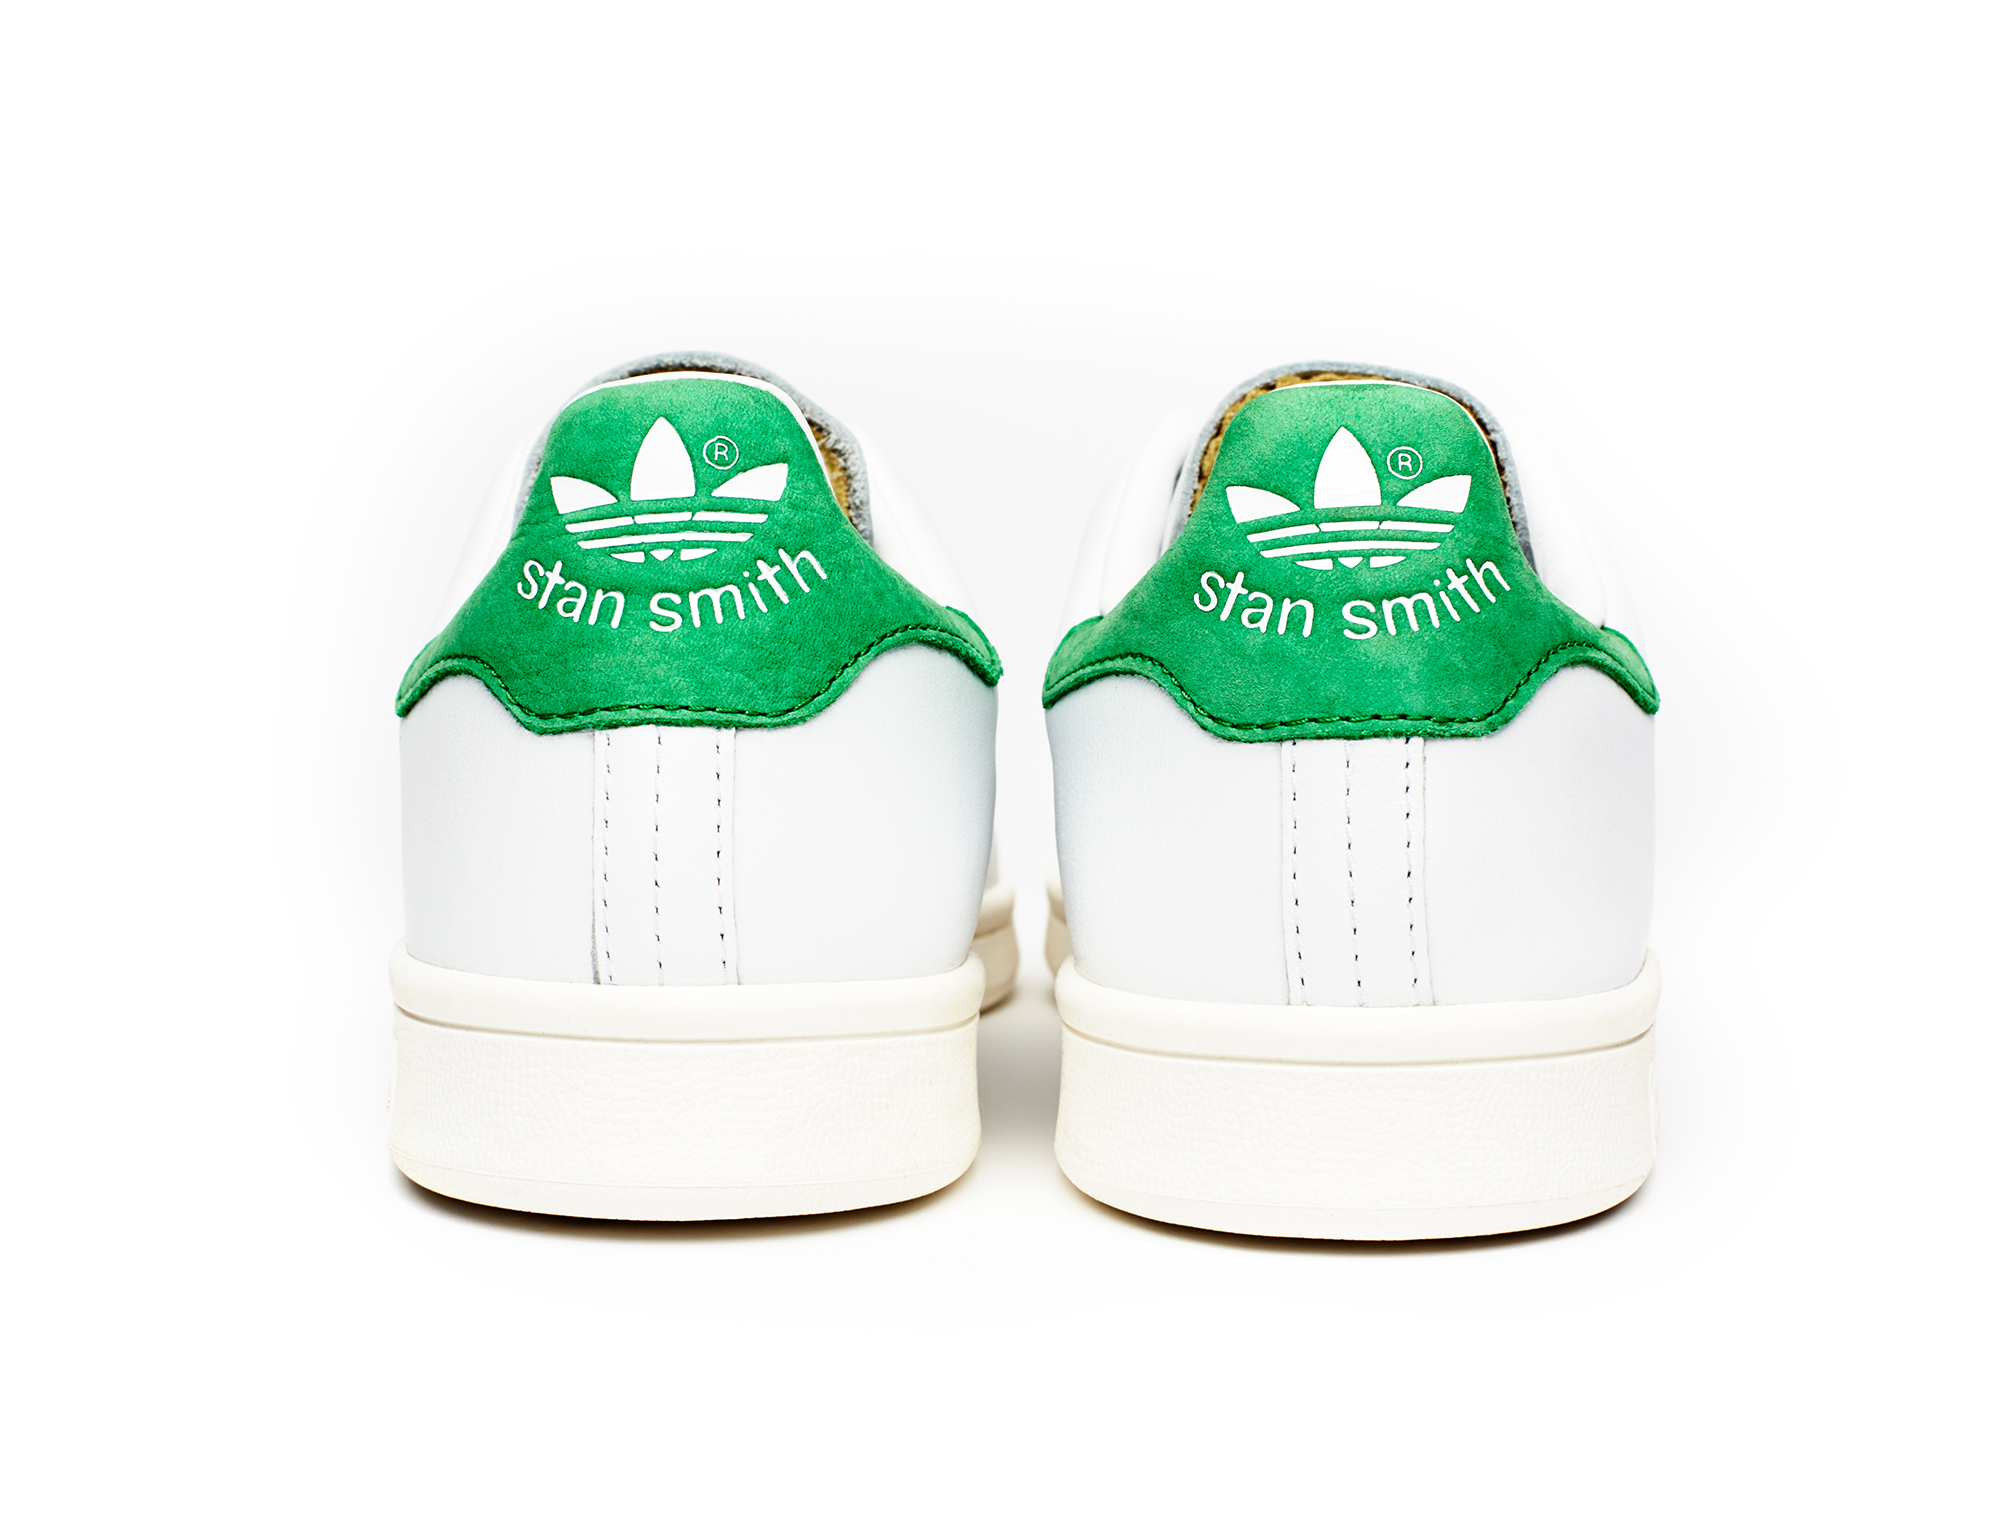 Adidas relaunches the Stan Smith tennis 